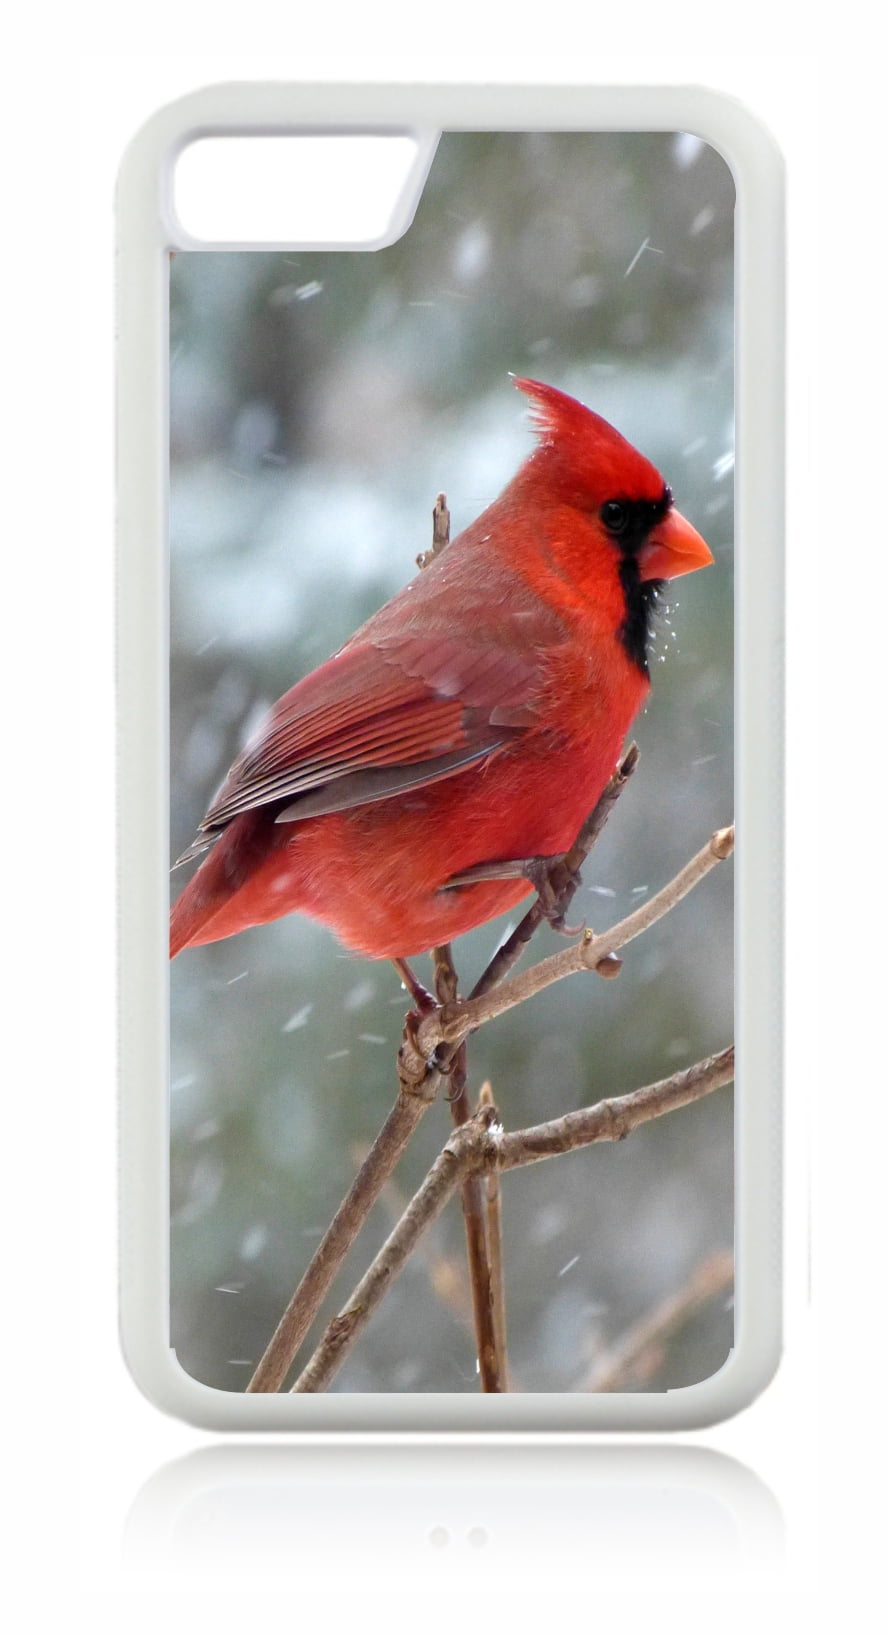 Red Cardinal Bird White Rubber Case for the Apple iPhone 6 / iPhone 6s - iPhone 6 Accessories - iPhone 6s Accessories